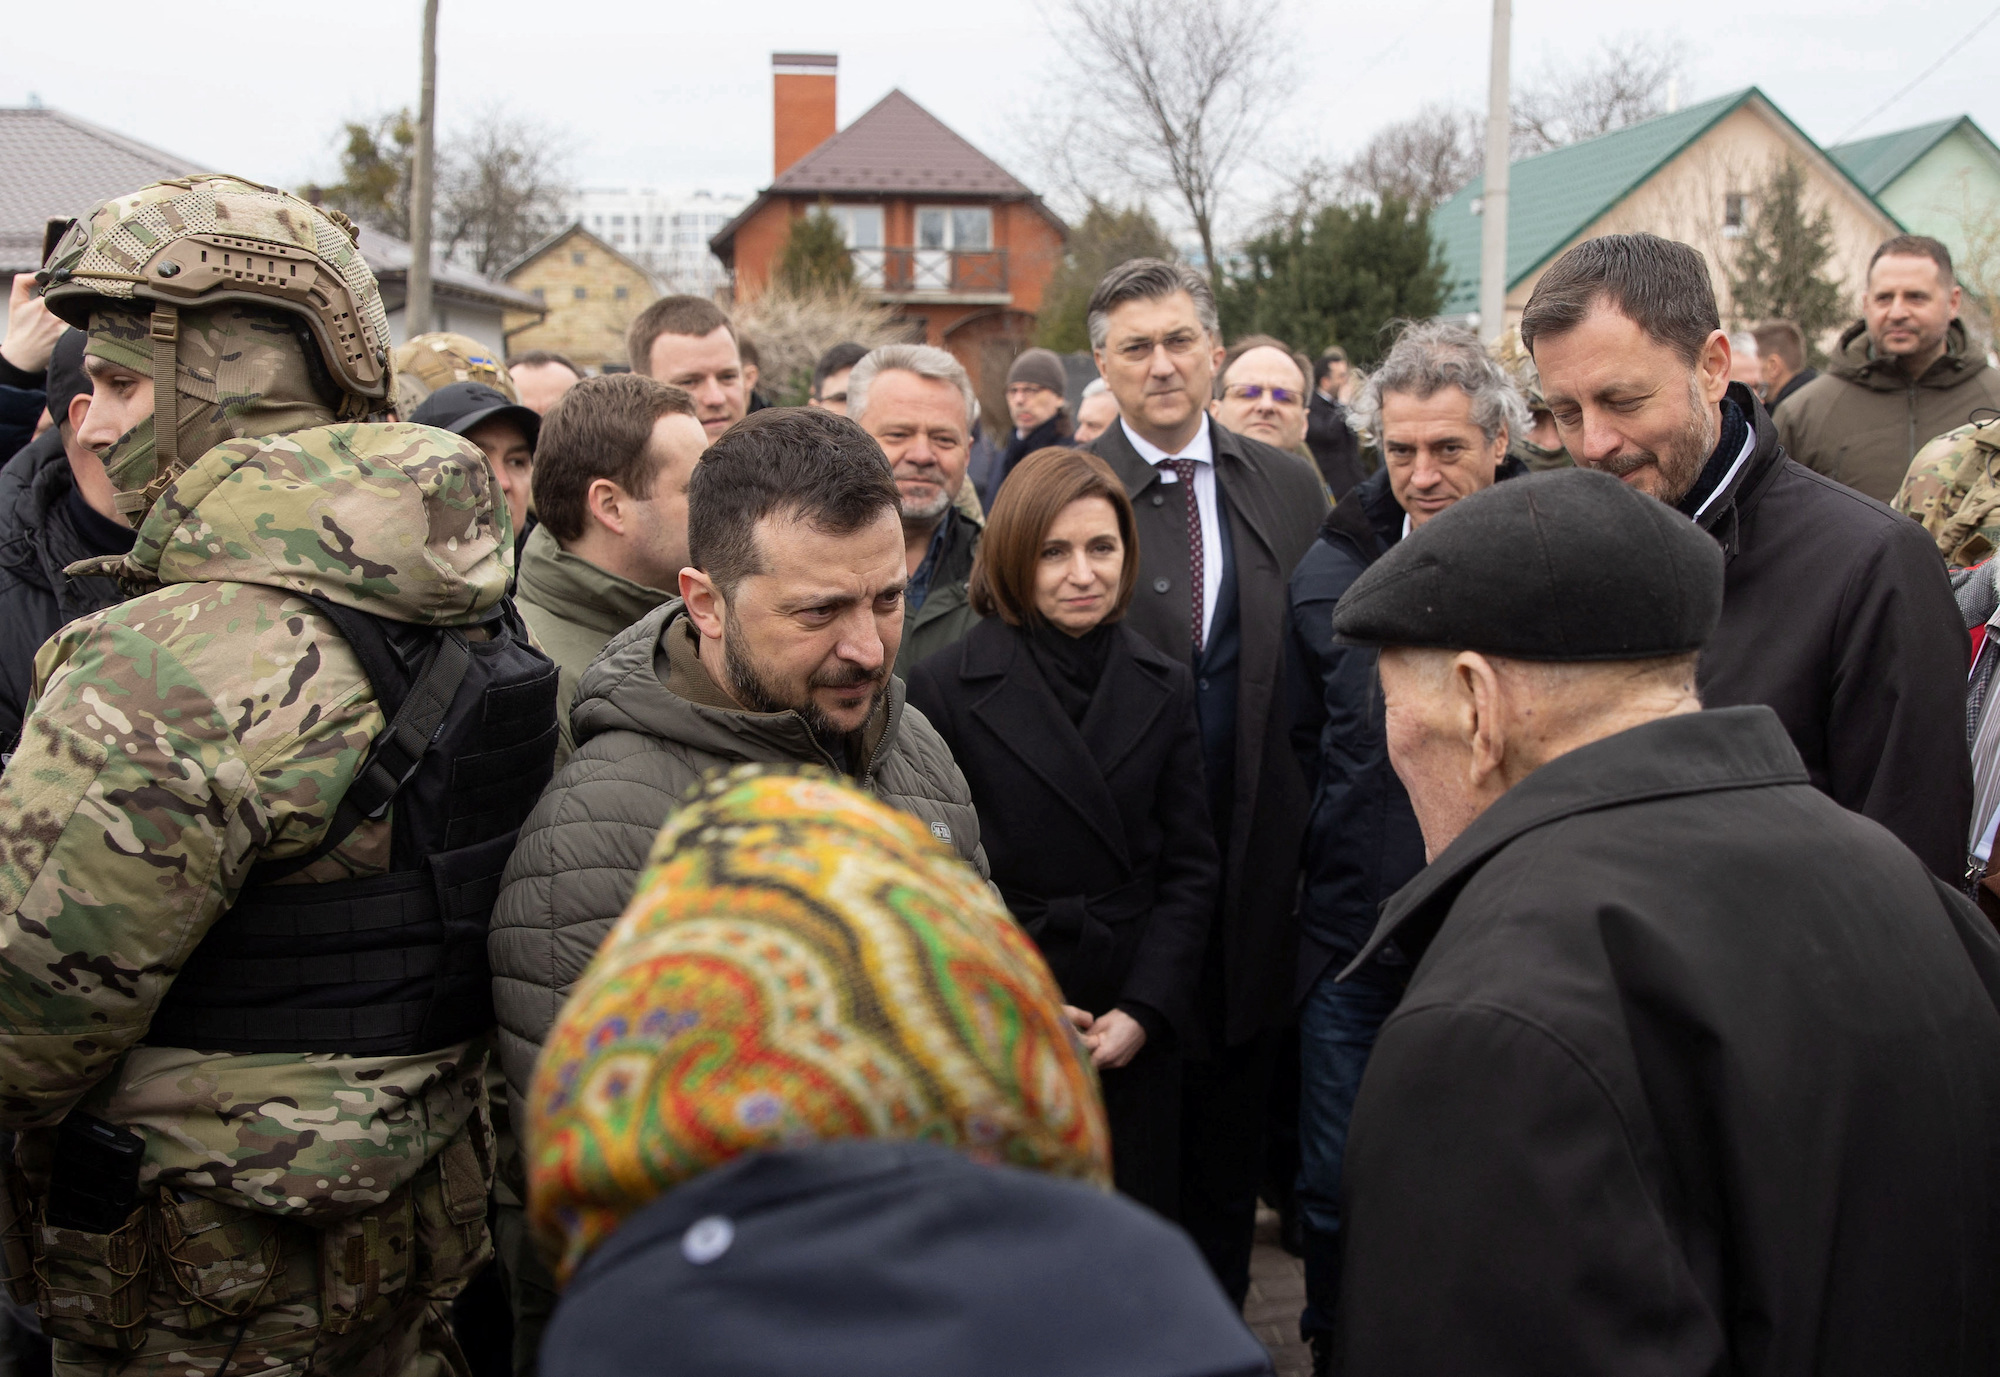 President Zelensky spoke with local residents in the town of Butchar on Friday.